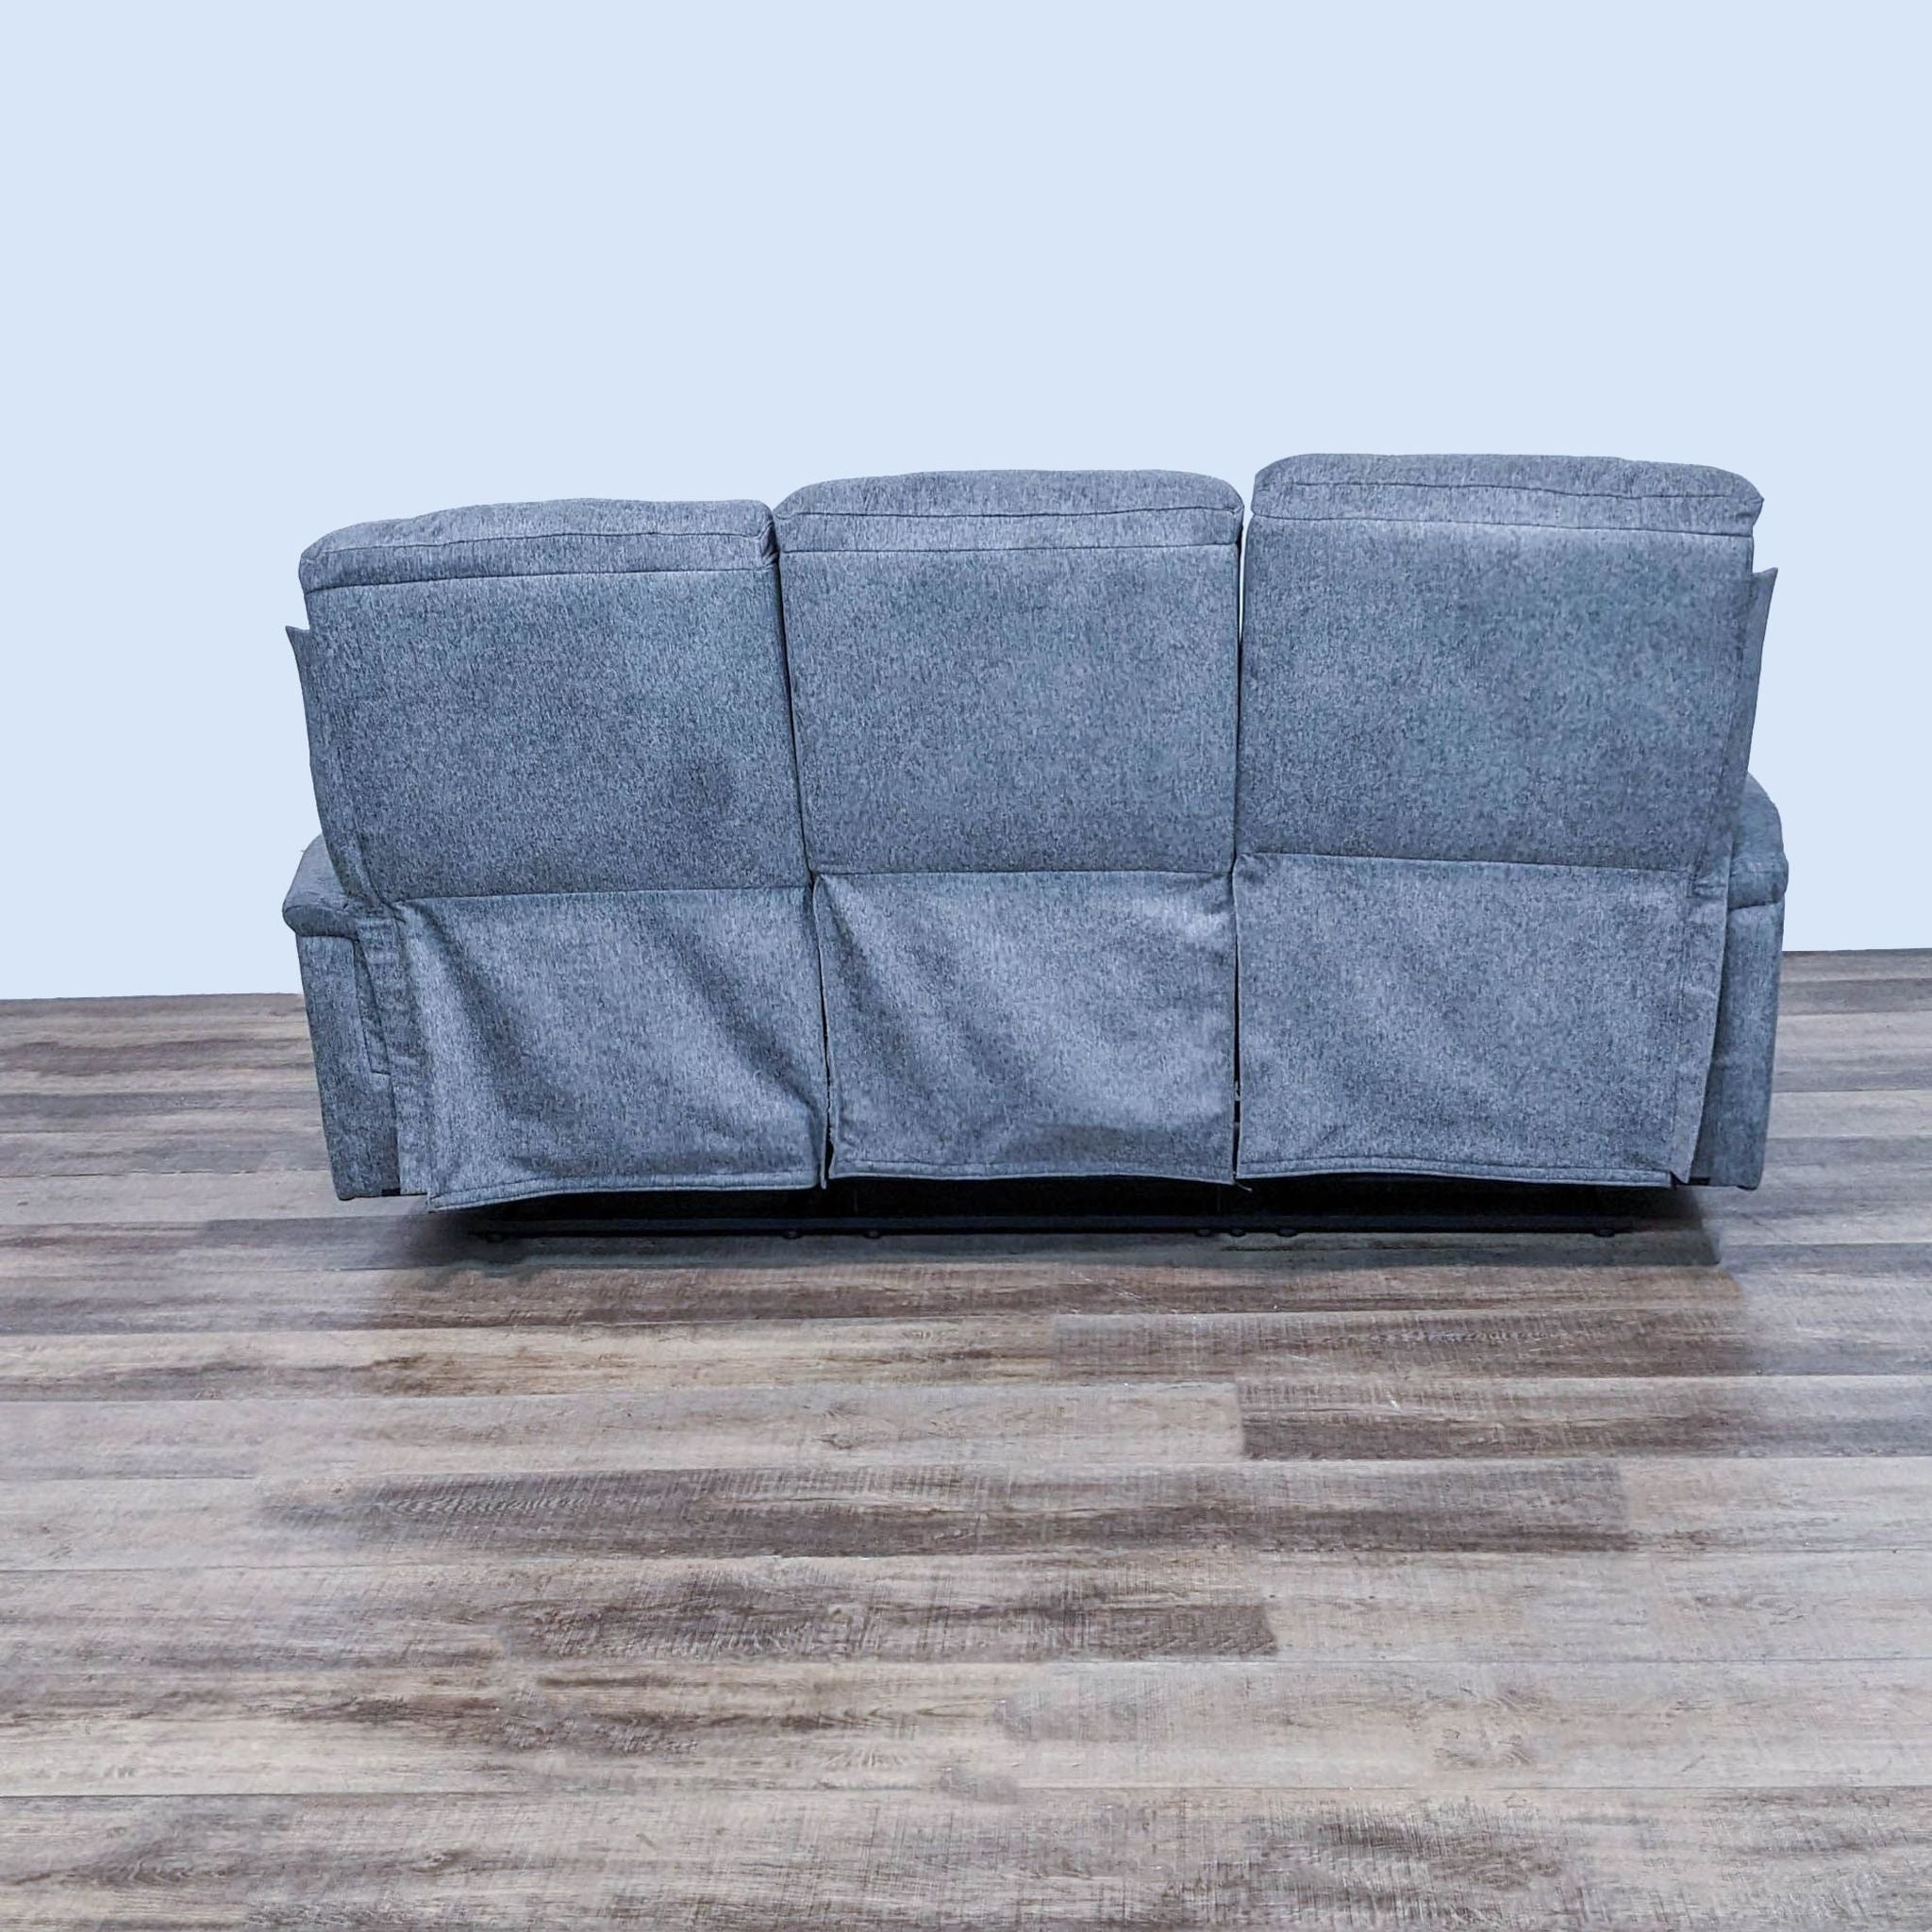 Alt text 2: Side view of a gray high-back dual reclining Living Spaces sofa showcasing the extended footrest and plush side padding.